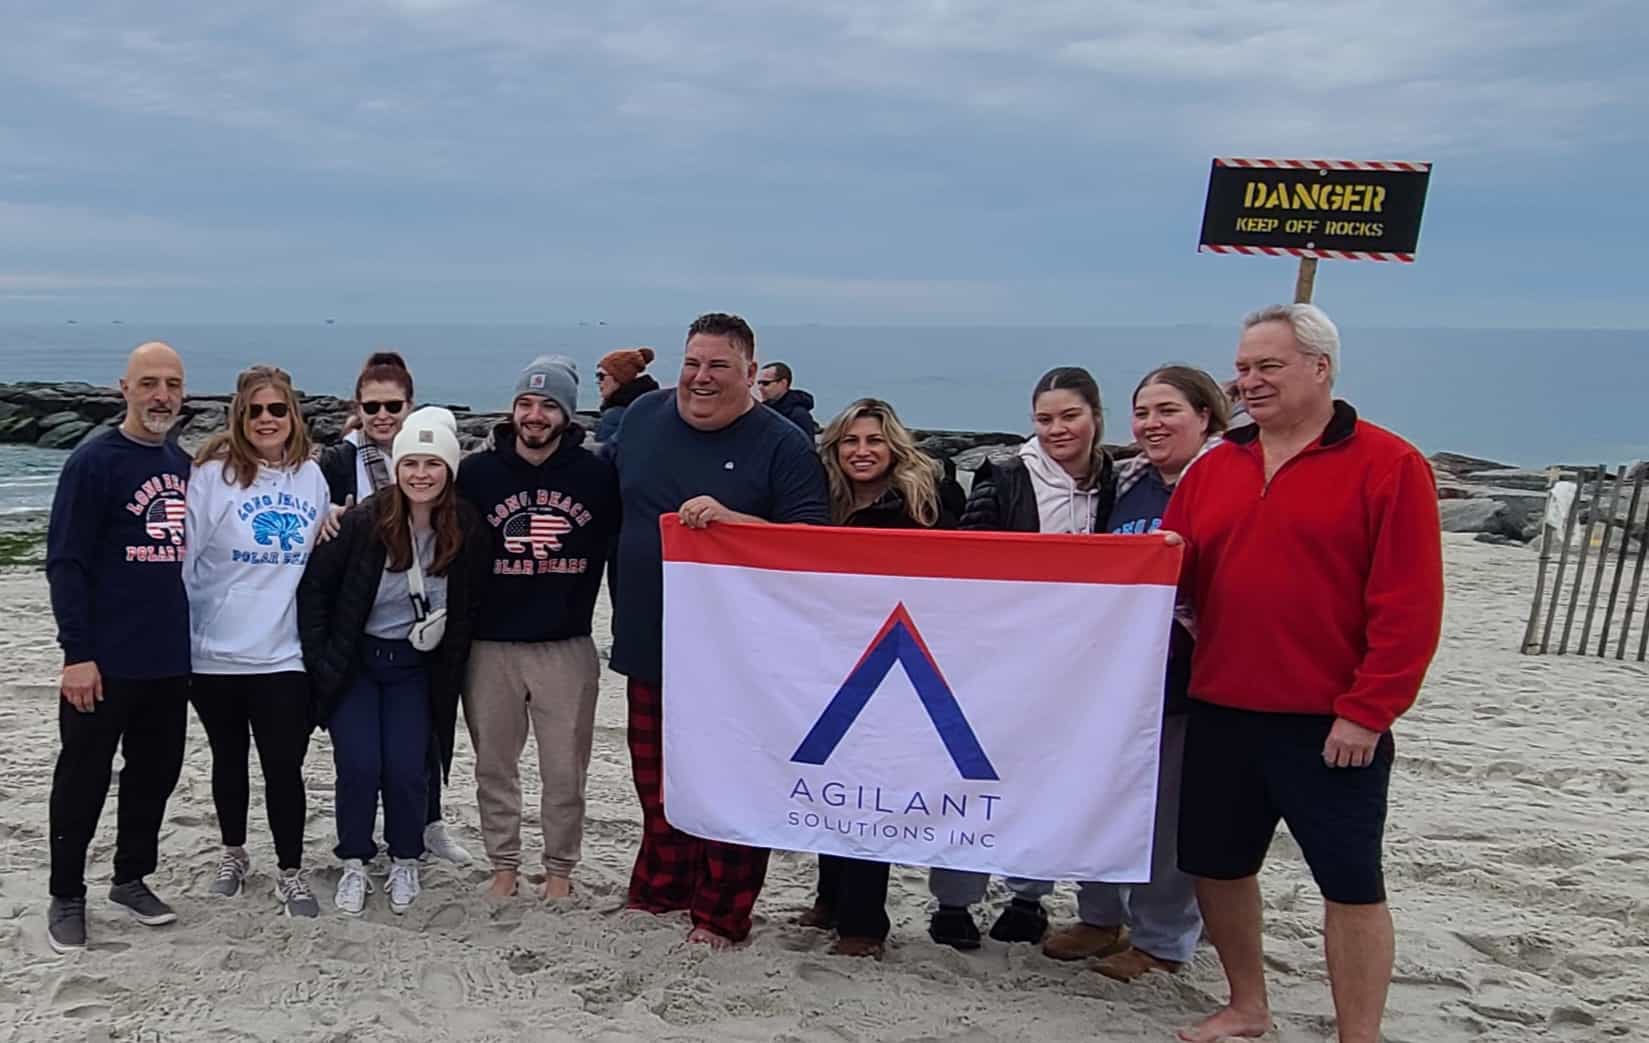 The Healthcare Team takes the Polar Bear Plunge in support of 'Wish Kids' from Make-A-Wish Foundation